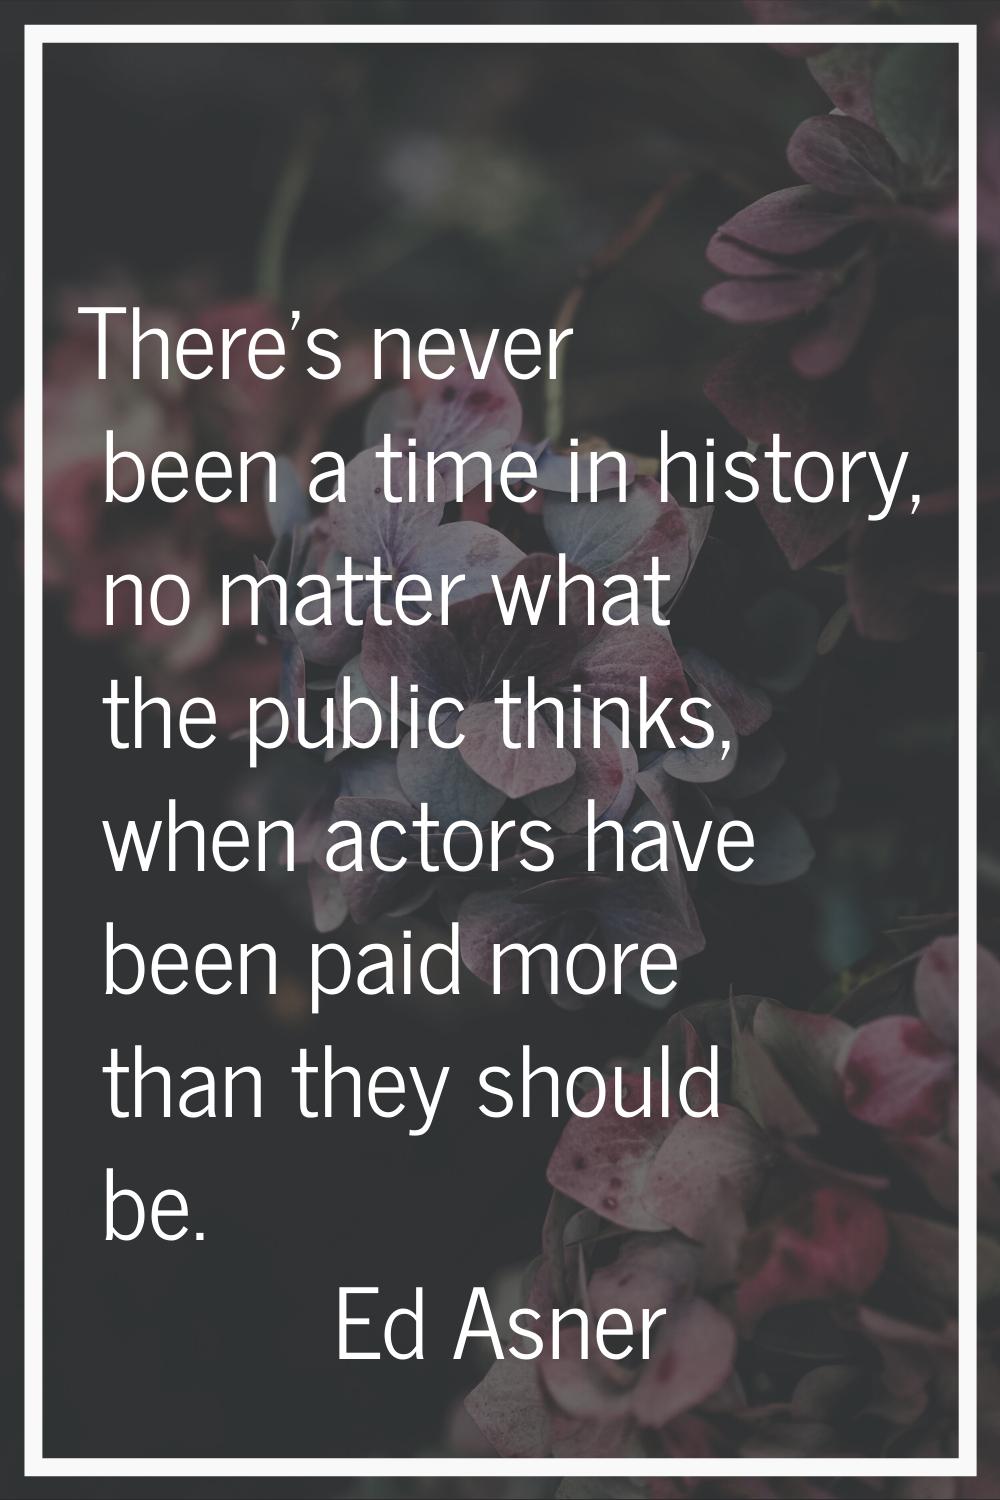 There's never been a time in history, no matter what the public thinks, when actors have been paid 